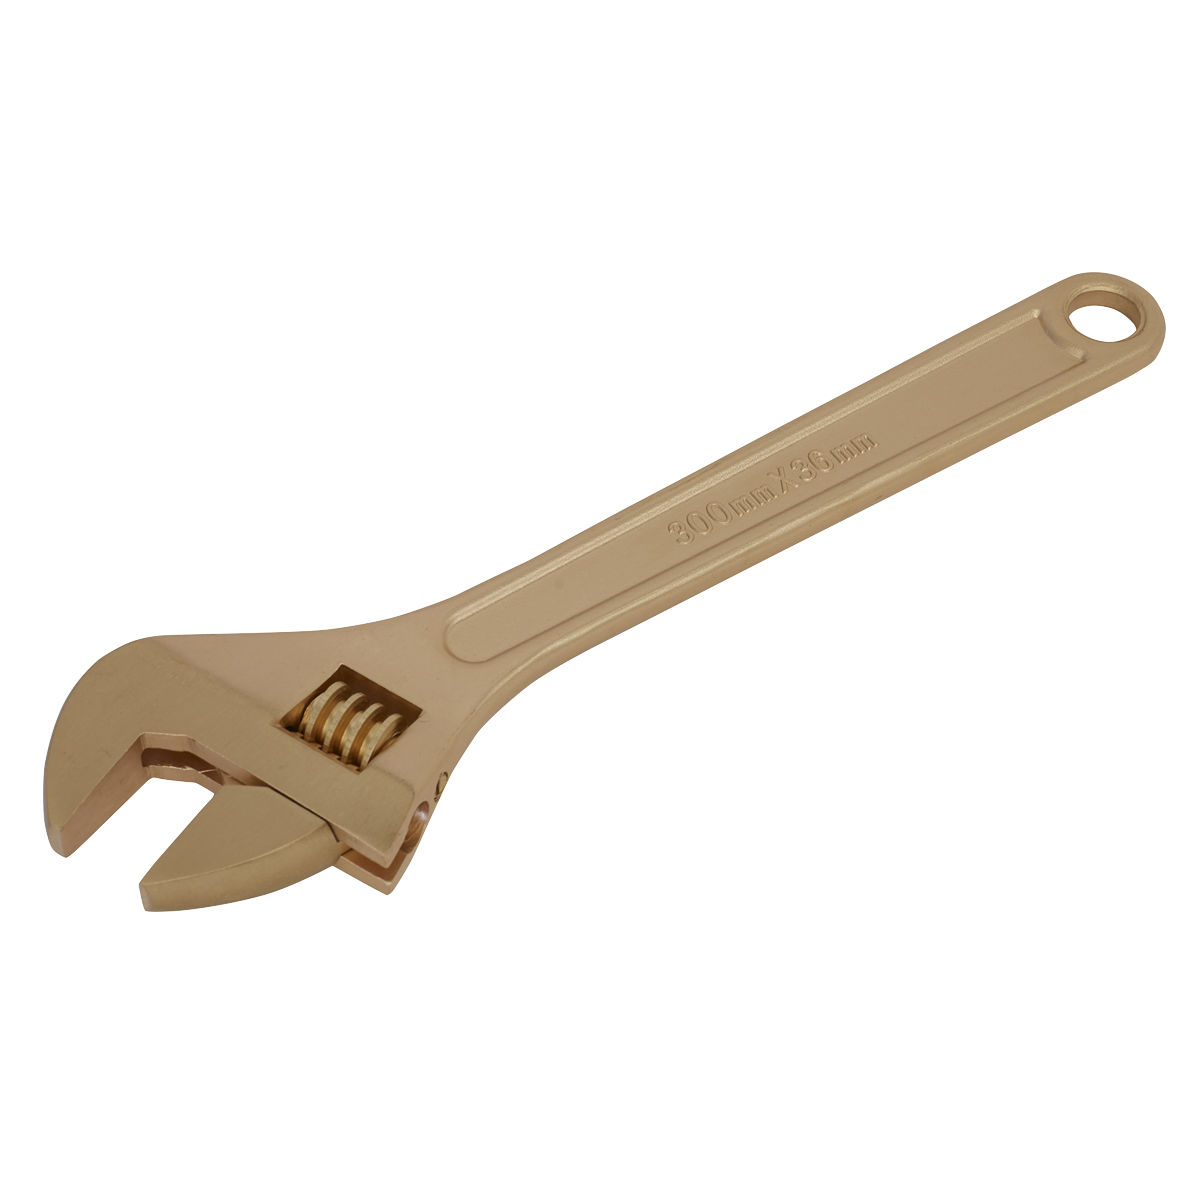 Adjustable Wrench 300mm - Non-Sparking - NS068 - Farming Parts